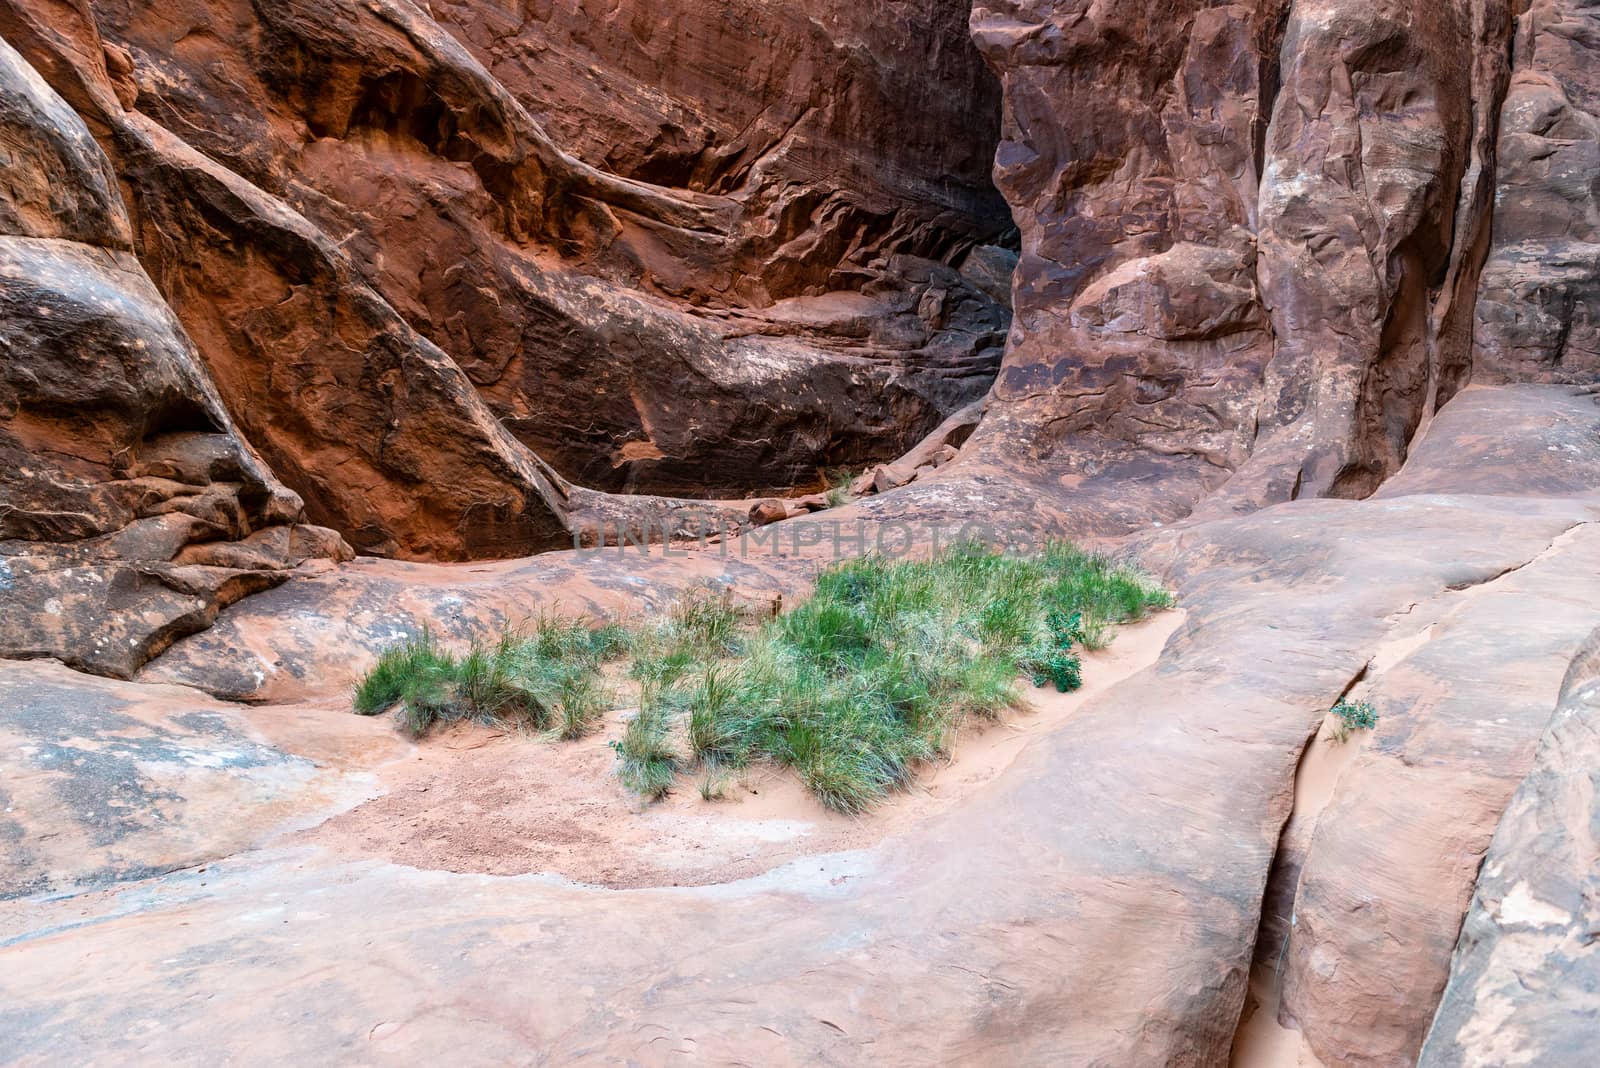 Grass growing in the desert setting of Fiery Furnace in Arches National Park, Utah by Njean